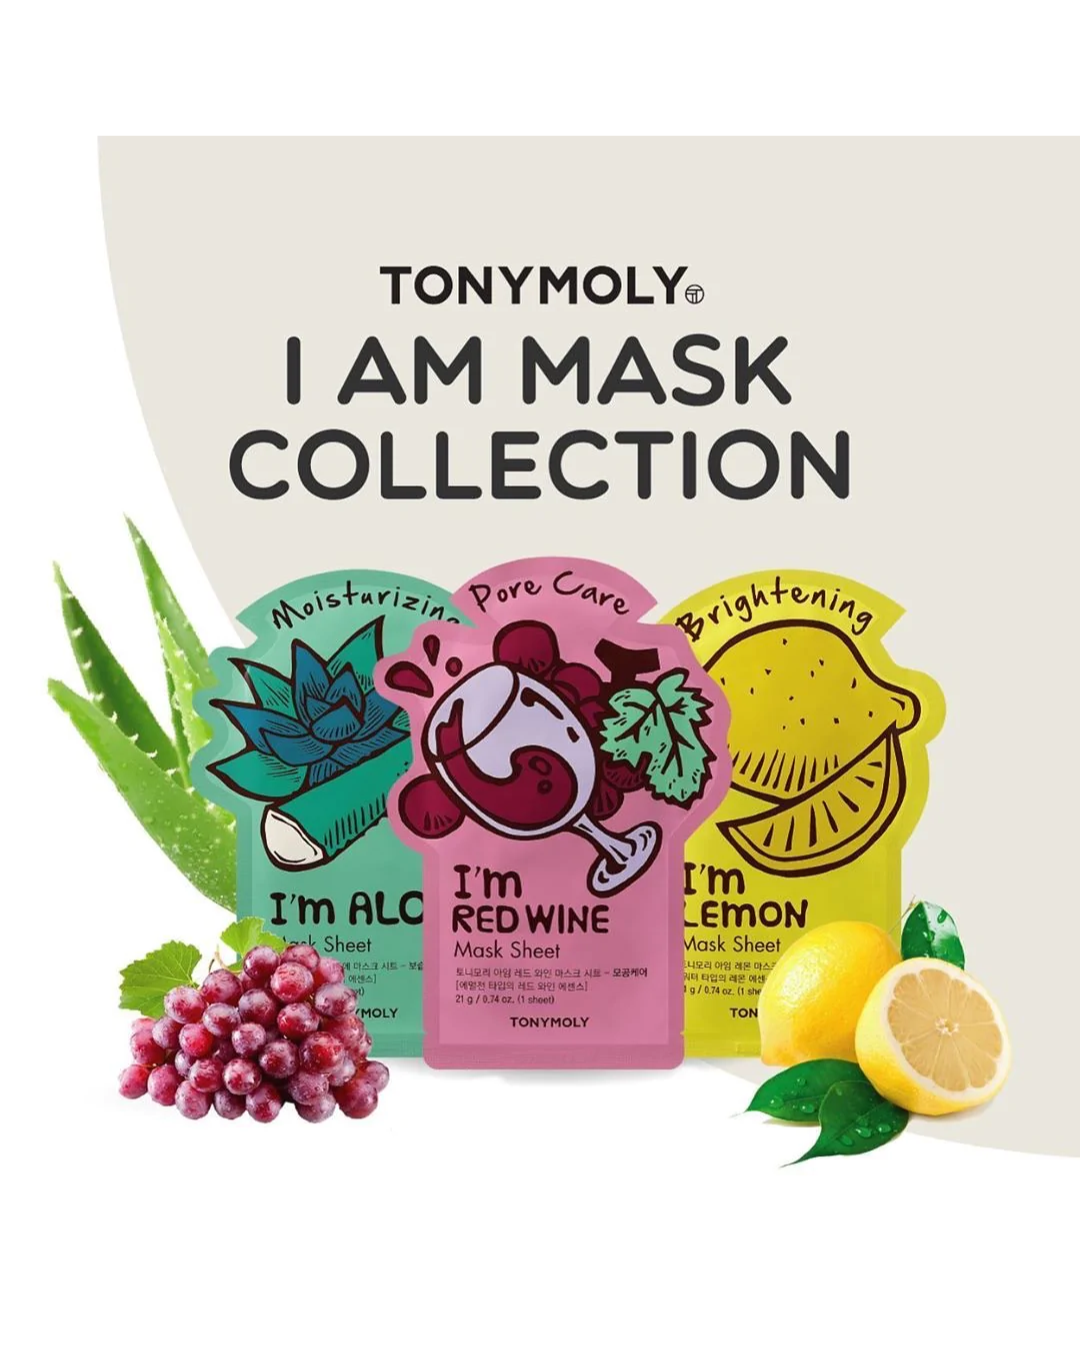 animation vente ved godt Tony Moly I'm Real Mask Sheet – Unique Bunny